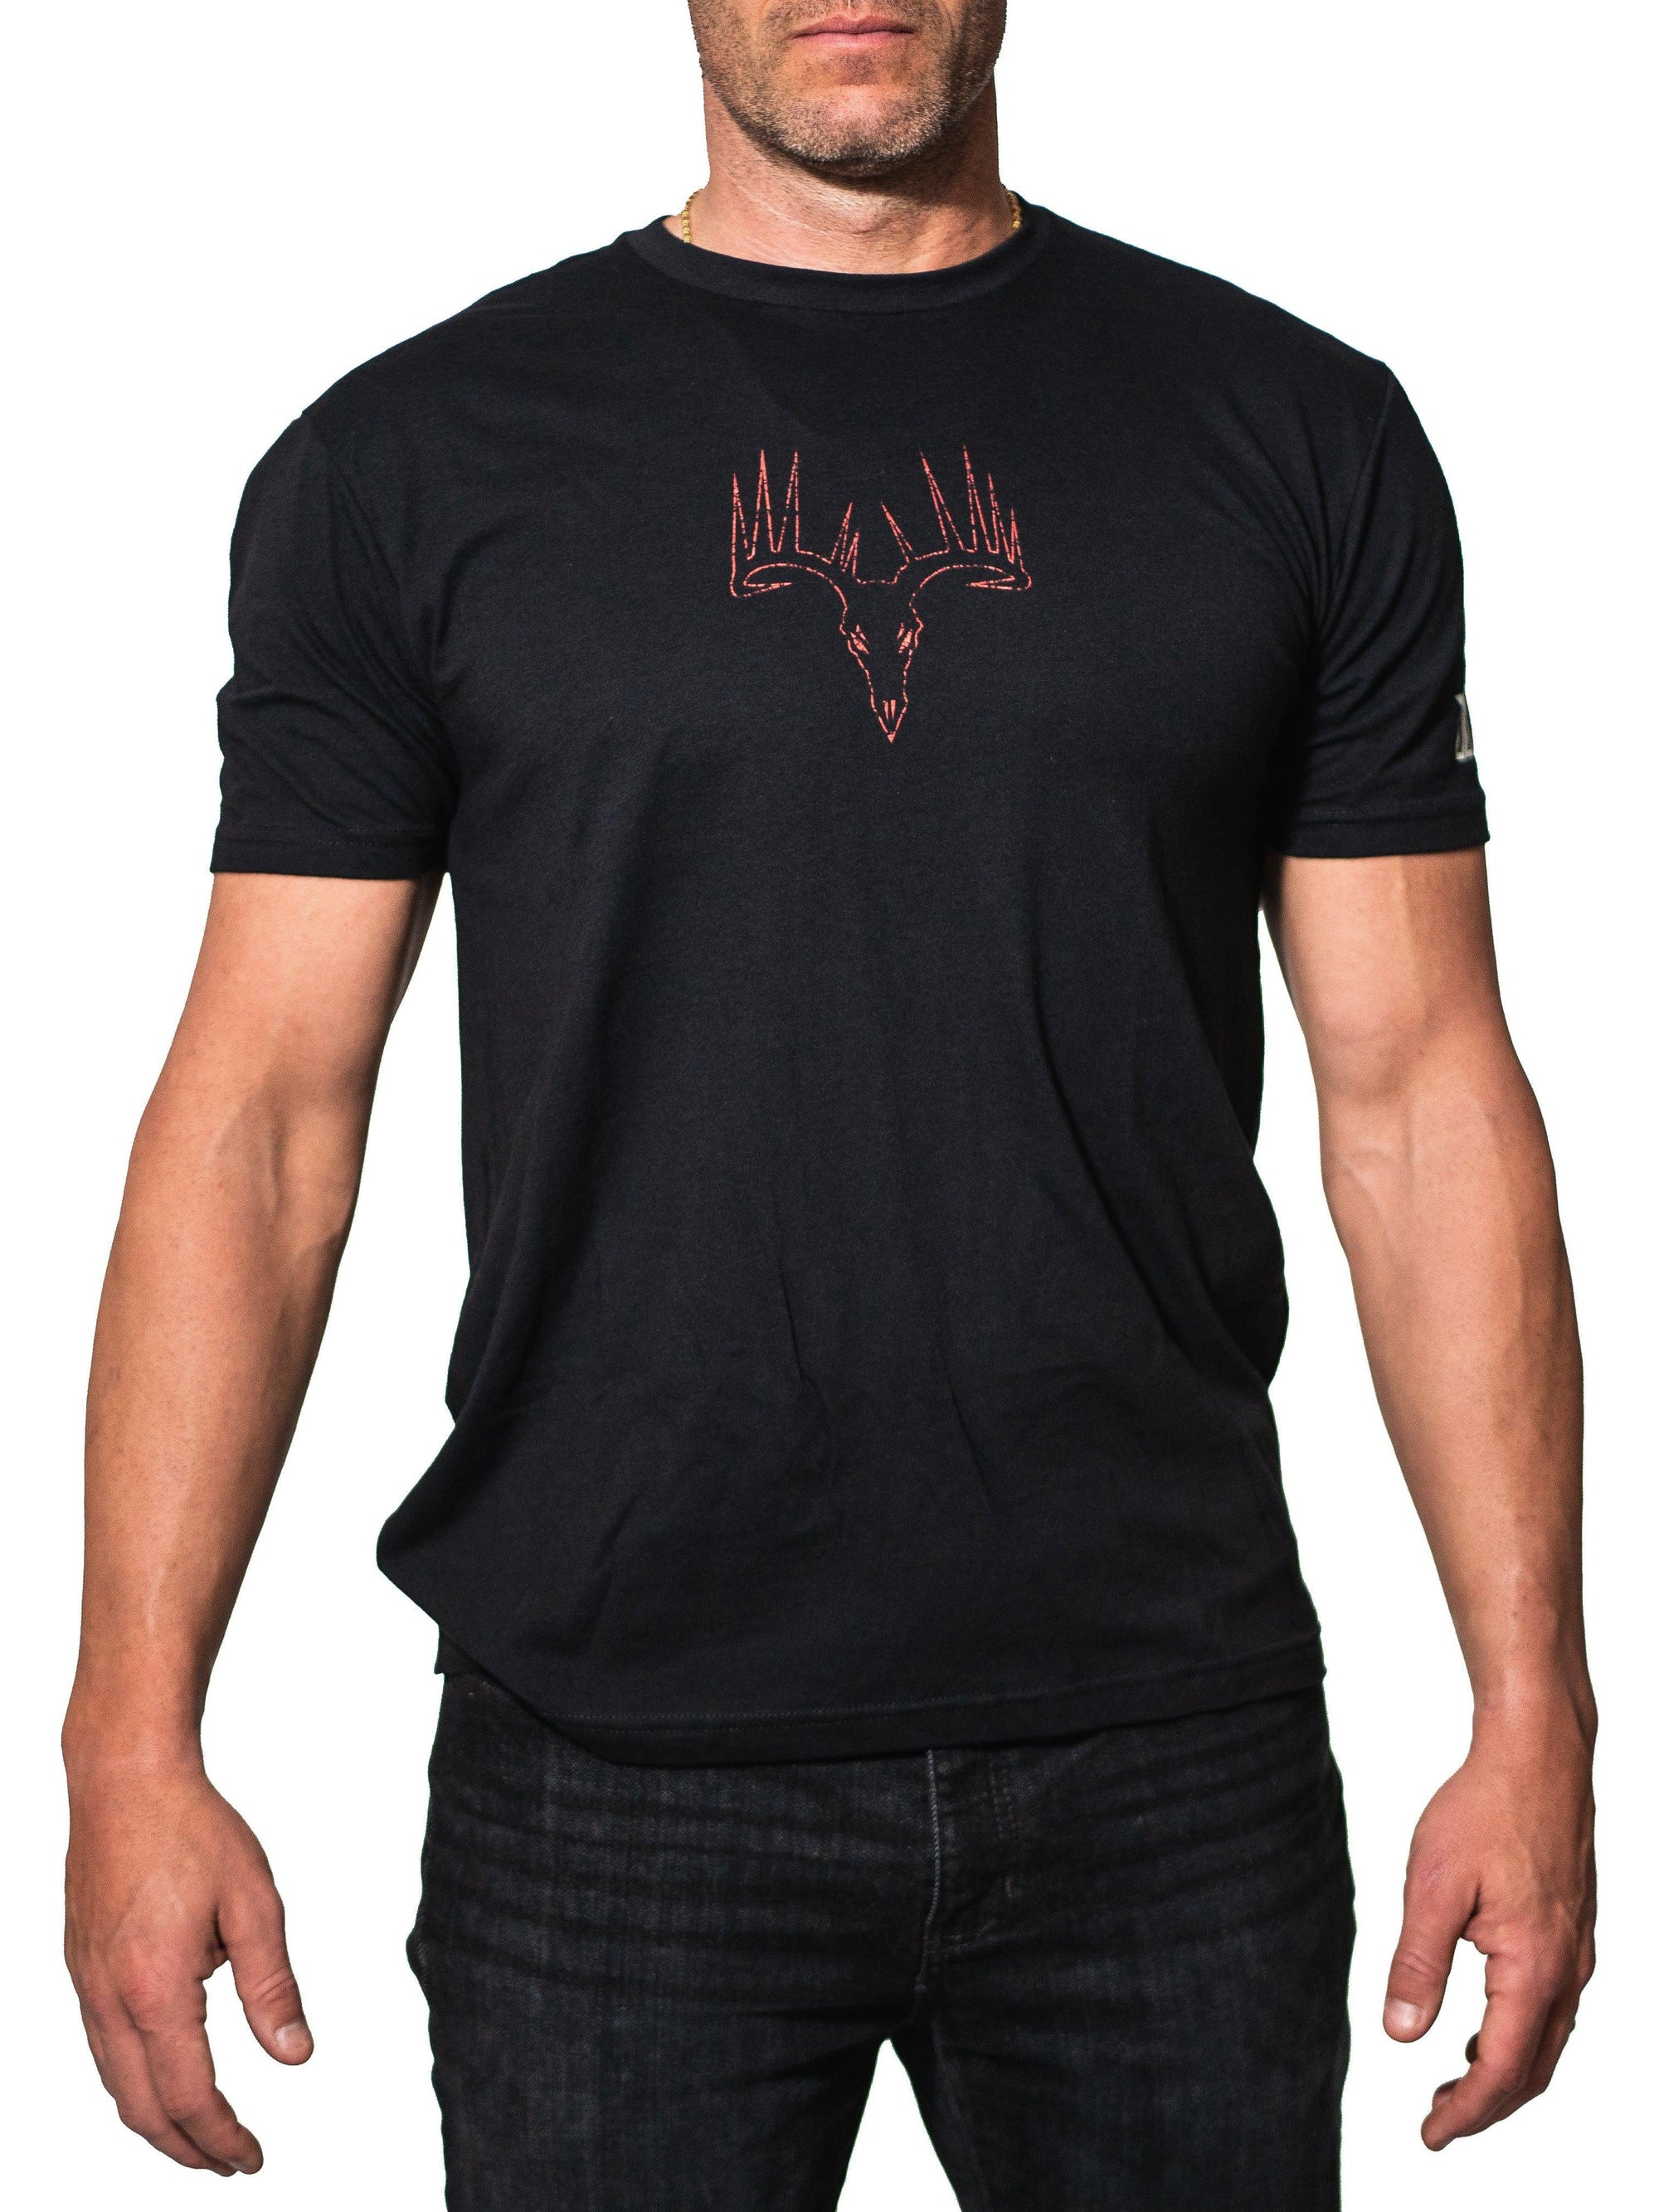 Live Wild Fear Nothing Tee